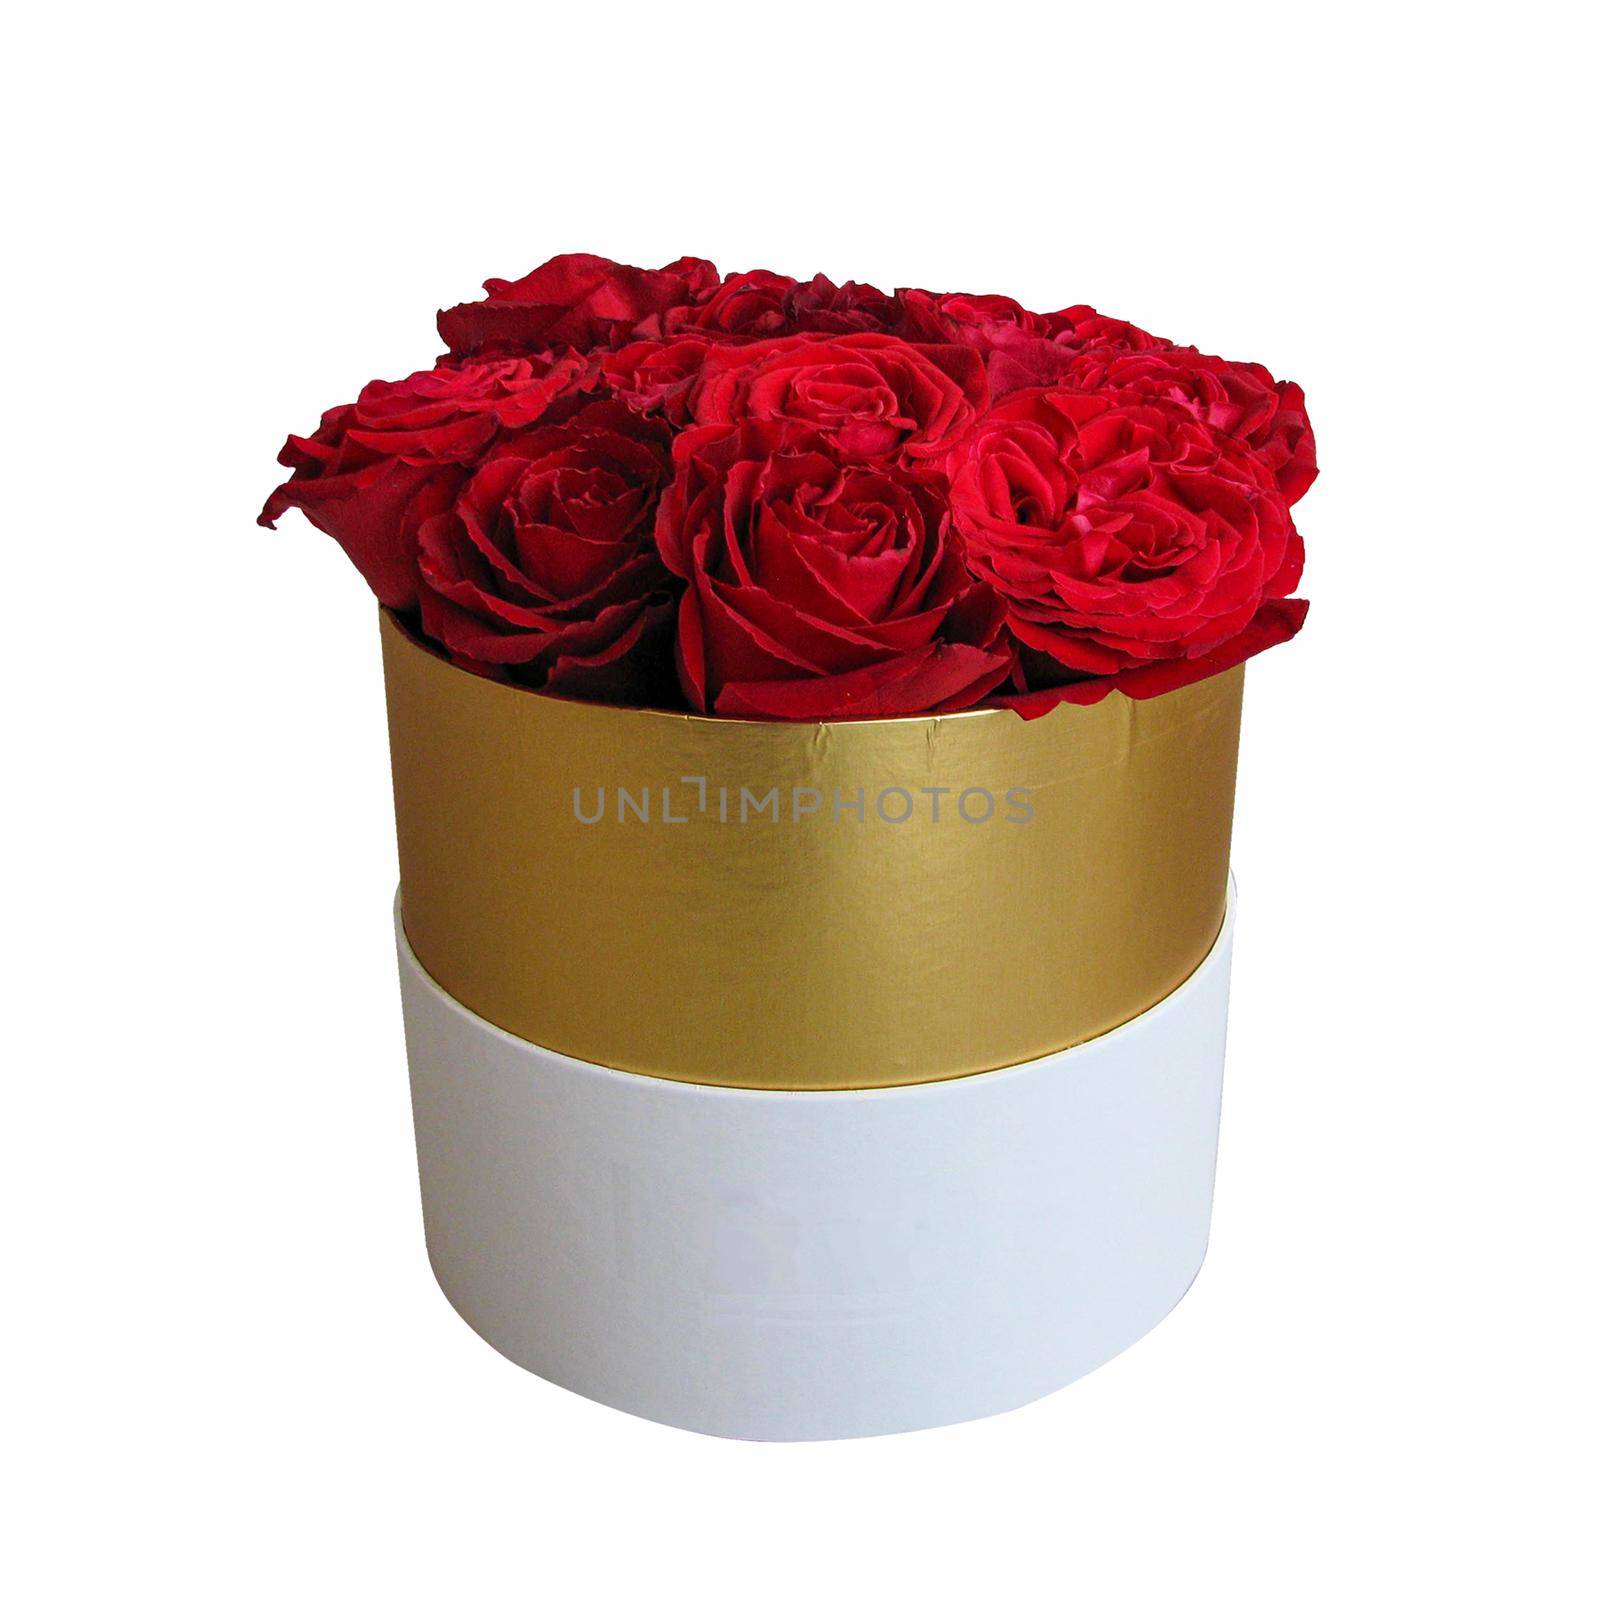 Romantic luxury red roses bouquet in a white and gold round gift box isolated on white background.